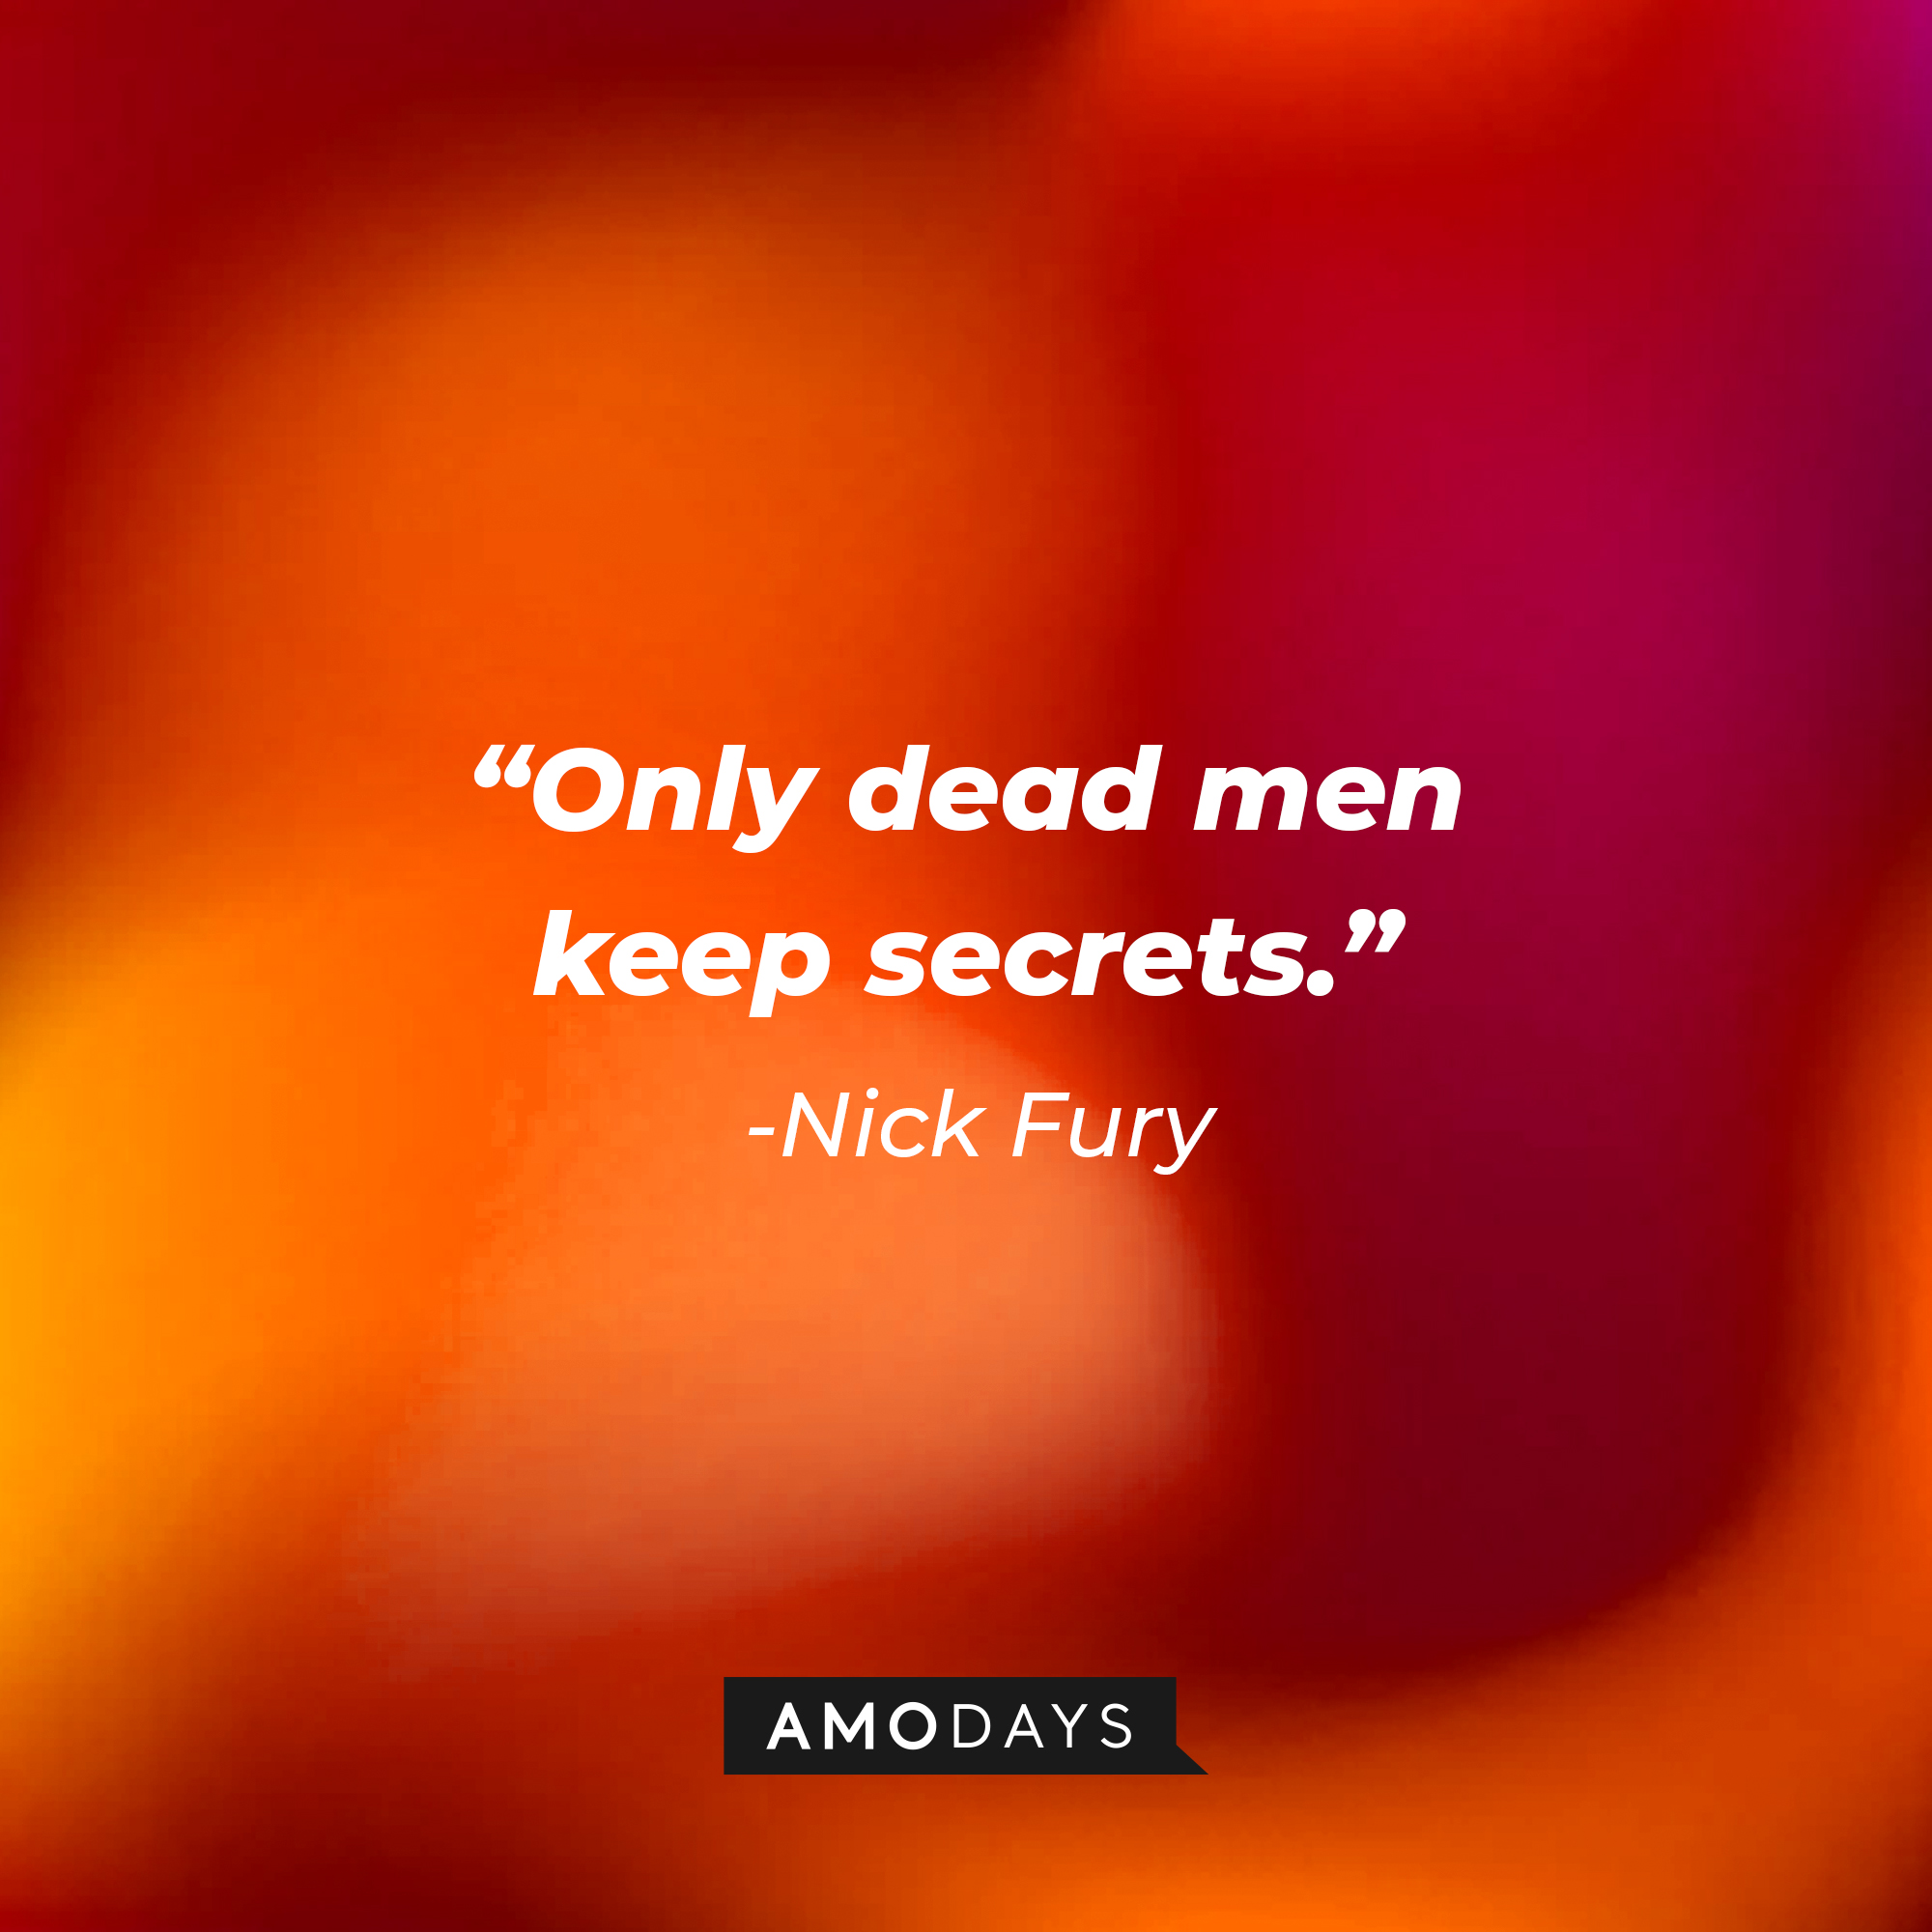 Nick Fury's quote: "Only dead men keep secrets." | Source: AmoDays